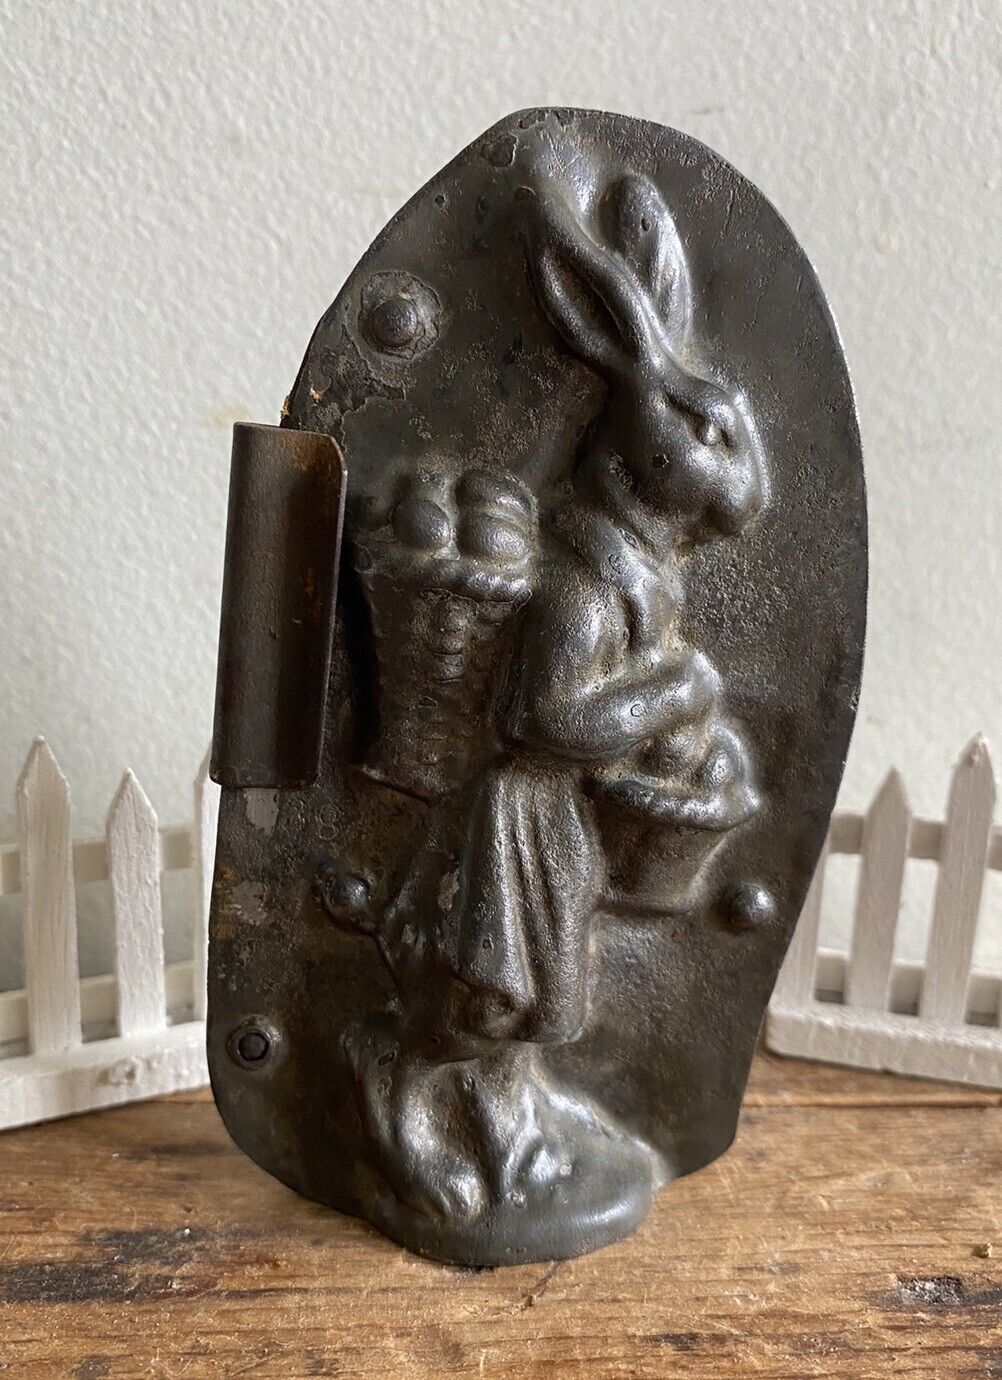 Early Dressed Bunny Rabbit carrying egg Baskets • Antique Chocolate Mold